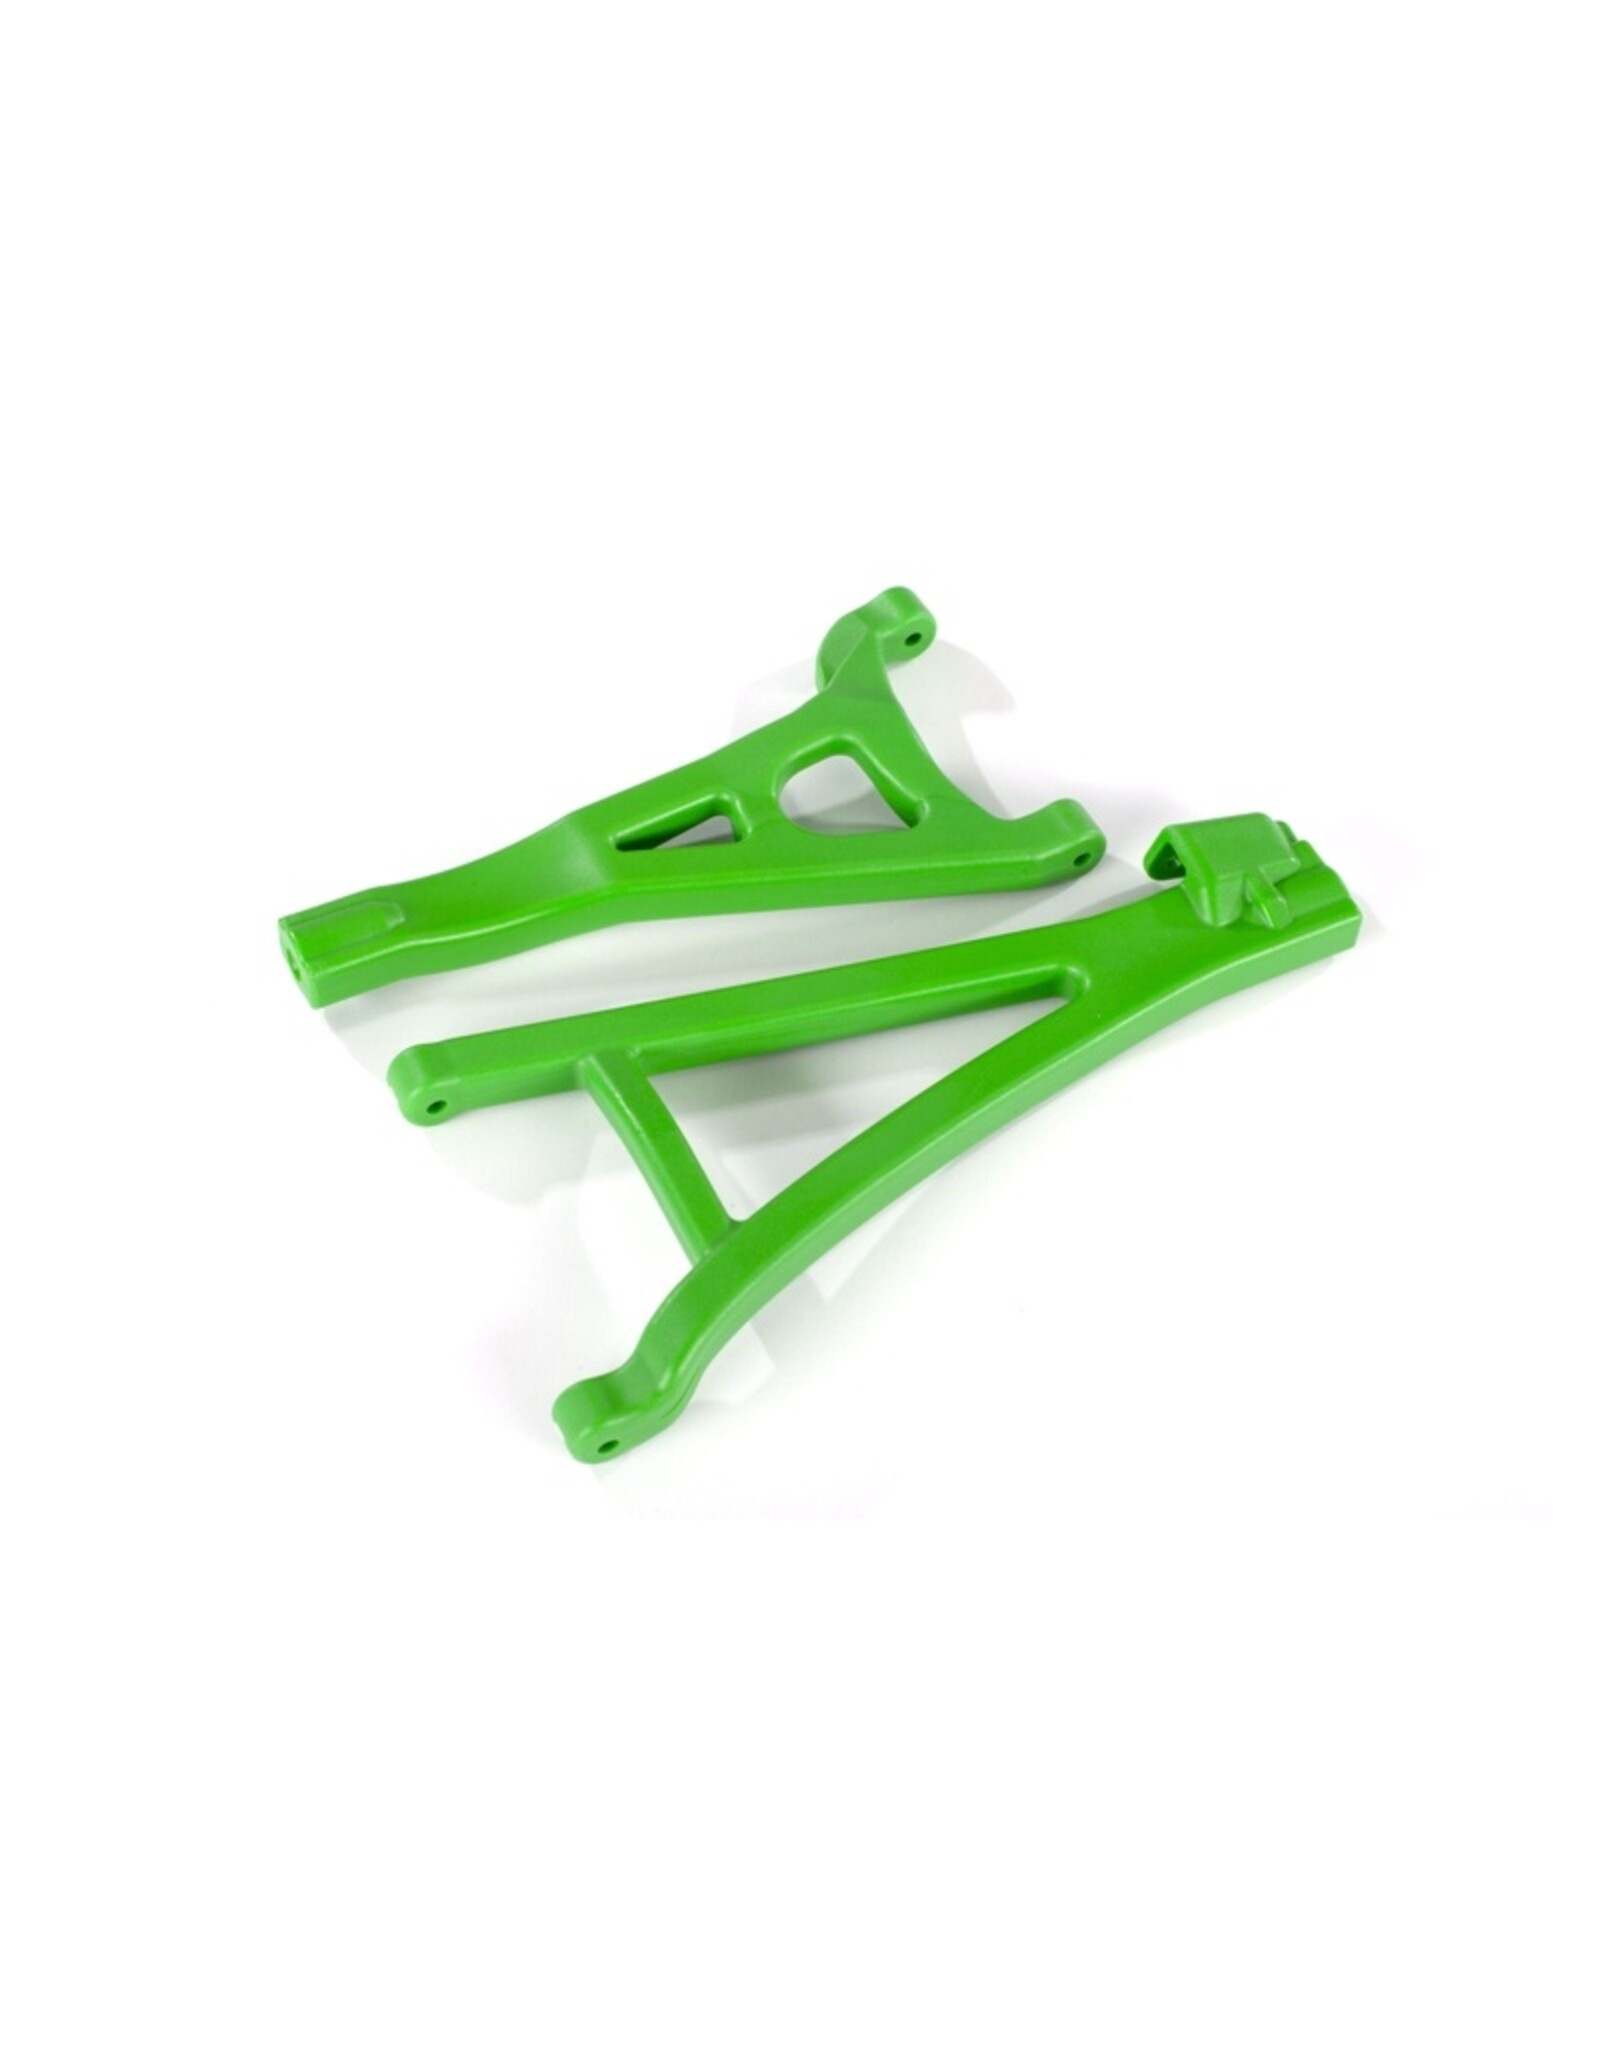 Traxxas TRA8632G SUSPENSION ARMS GRN FRNT HD